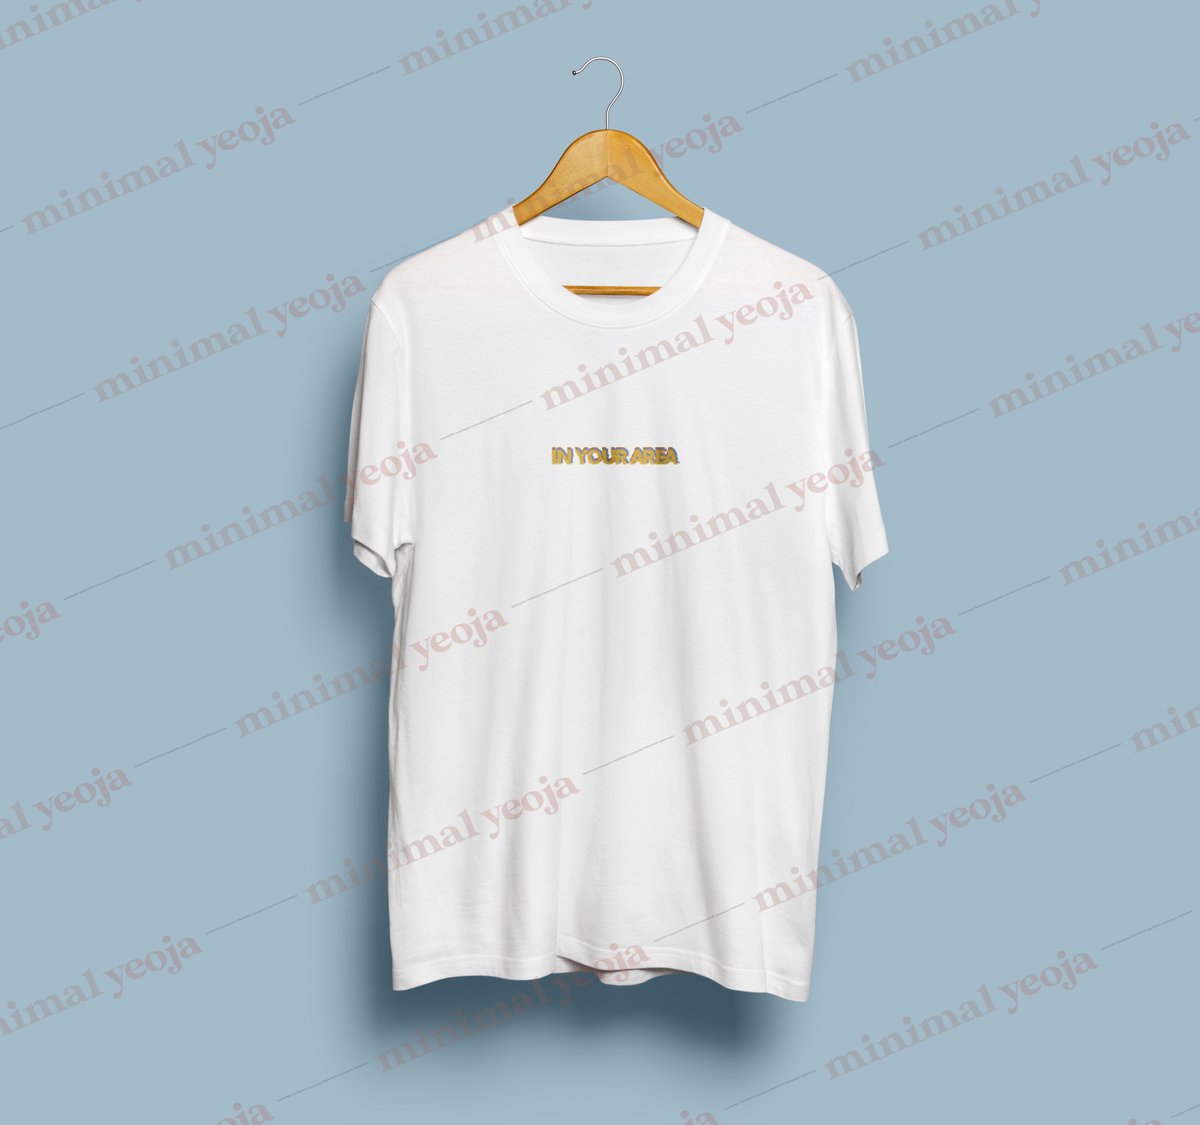 Revolution [CODE: TR]"IN YOUR AREA"Price: 495Material: Poly cottonSizes: S, M, LColors: White, BlackSize of design at the back: a4 sizePrinting process: Vinyl